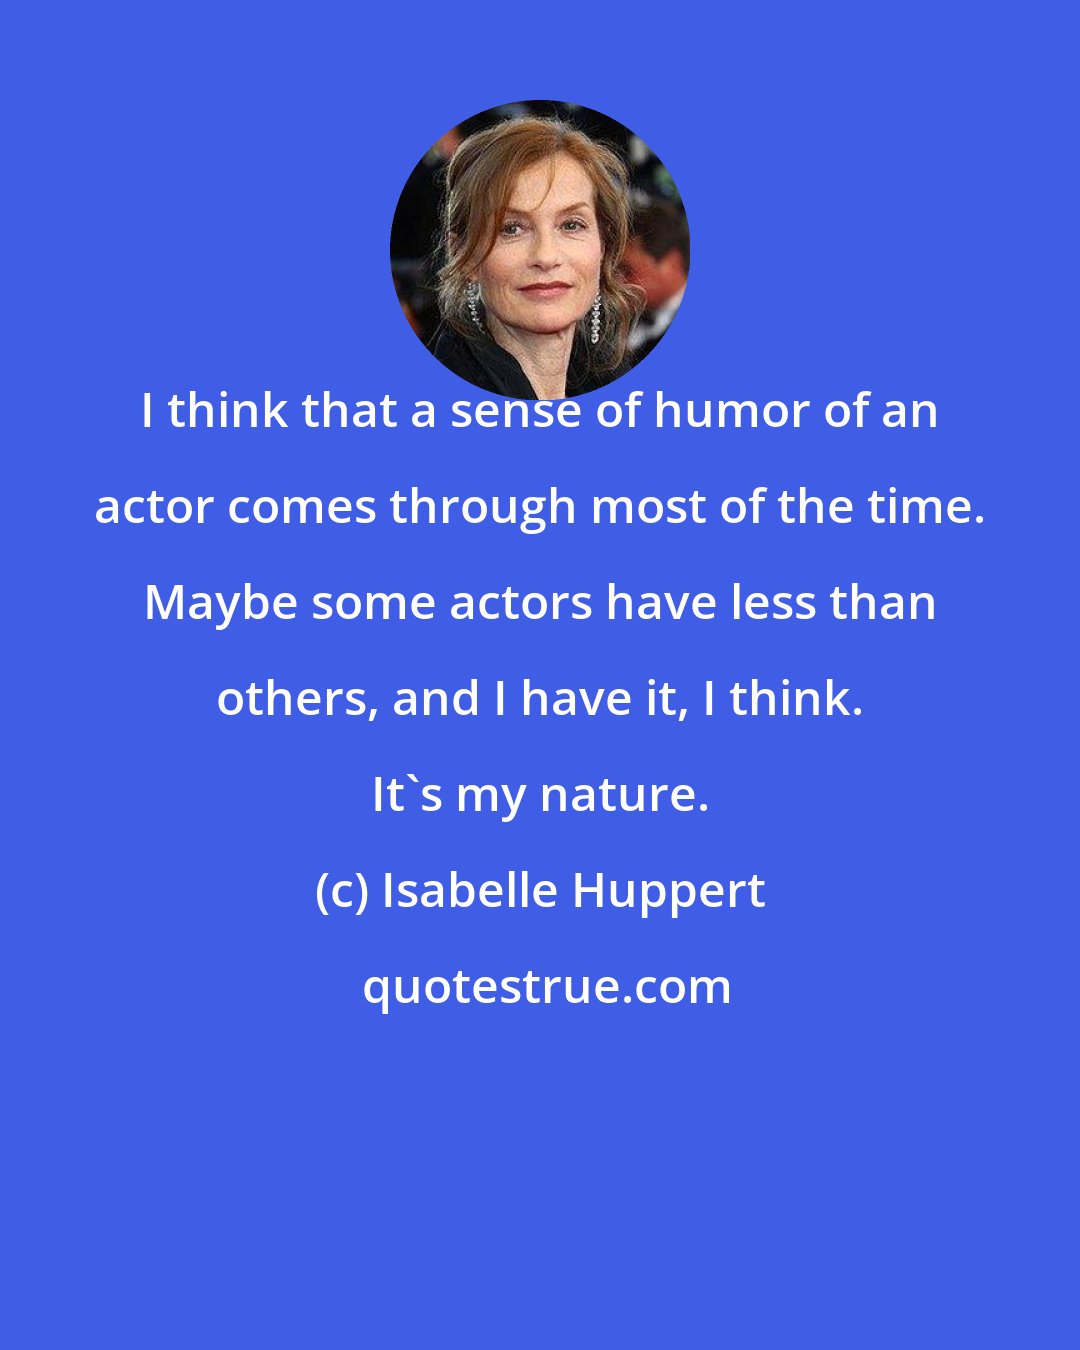 Isabelle Huppert: I think that a sense of humor of an actor comes through most of the time. Maybe some actors have less than others, and I have it, I think. It's my nature.